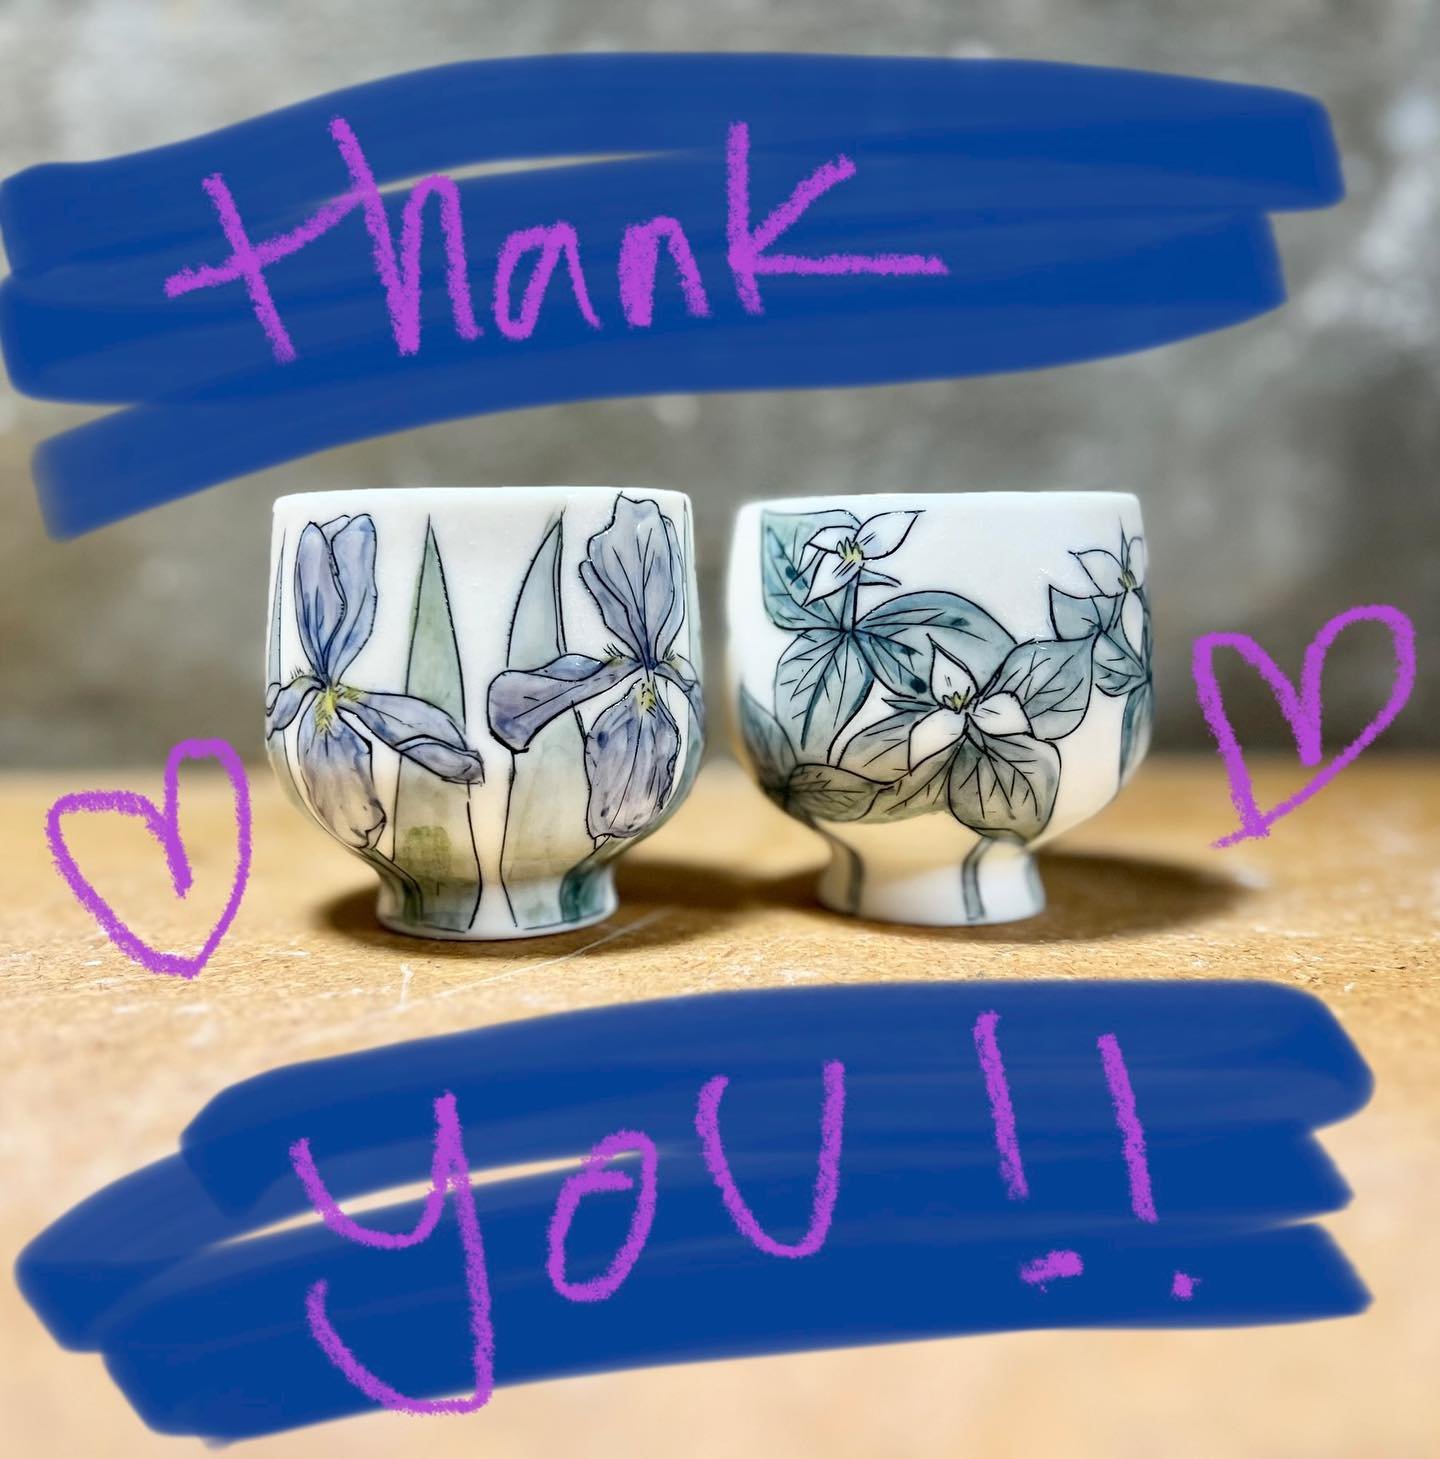 Thank you to everyone who came out to @ceramicshowcase this weekend and showed their support to all of us mud loving artists!  My heart is full! It was so great to meet so many new people, new artists, and make new connections with people who knew my